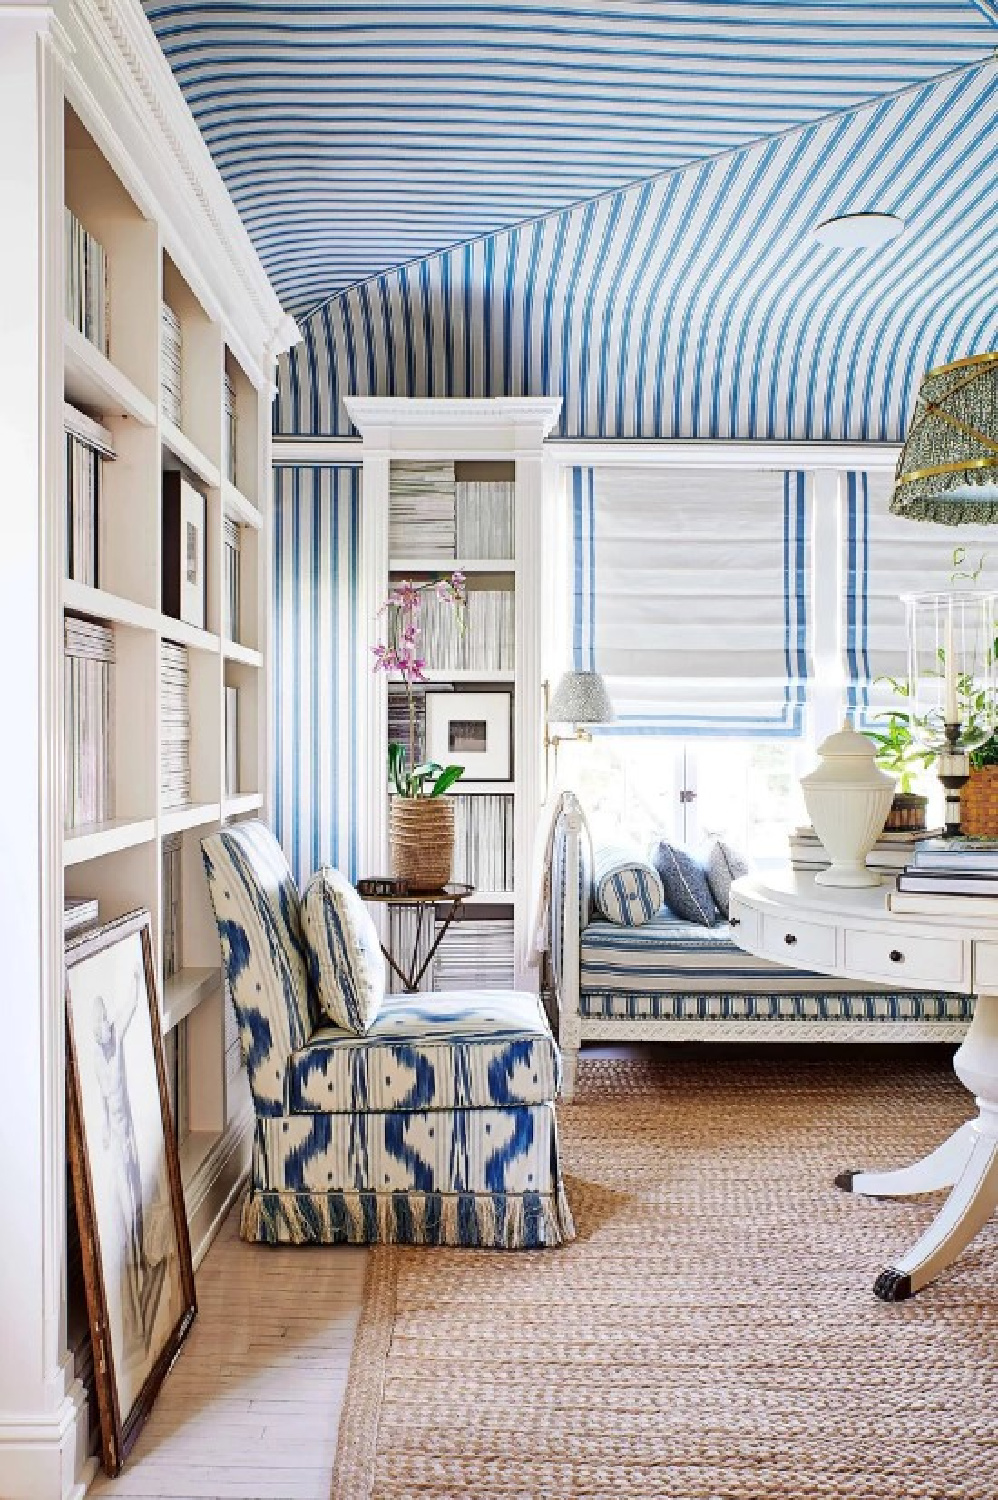 Mark Sikes designed blue room with stripe wallcovering on ceiling, daybed, and built-in bookshelves. From More Beautiful (Rizzoli, 2020) with photography by Amy Neunsinger.